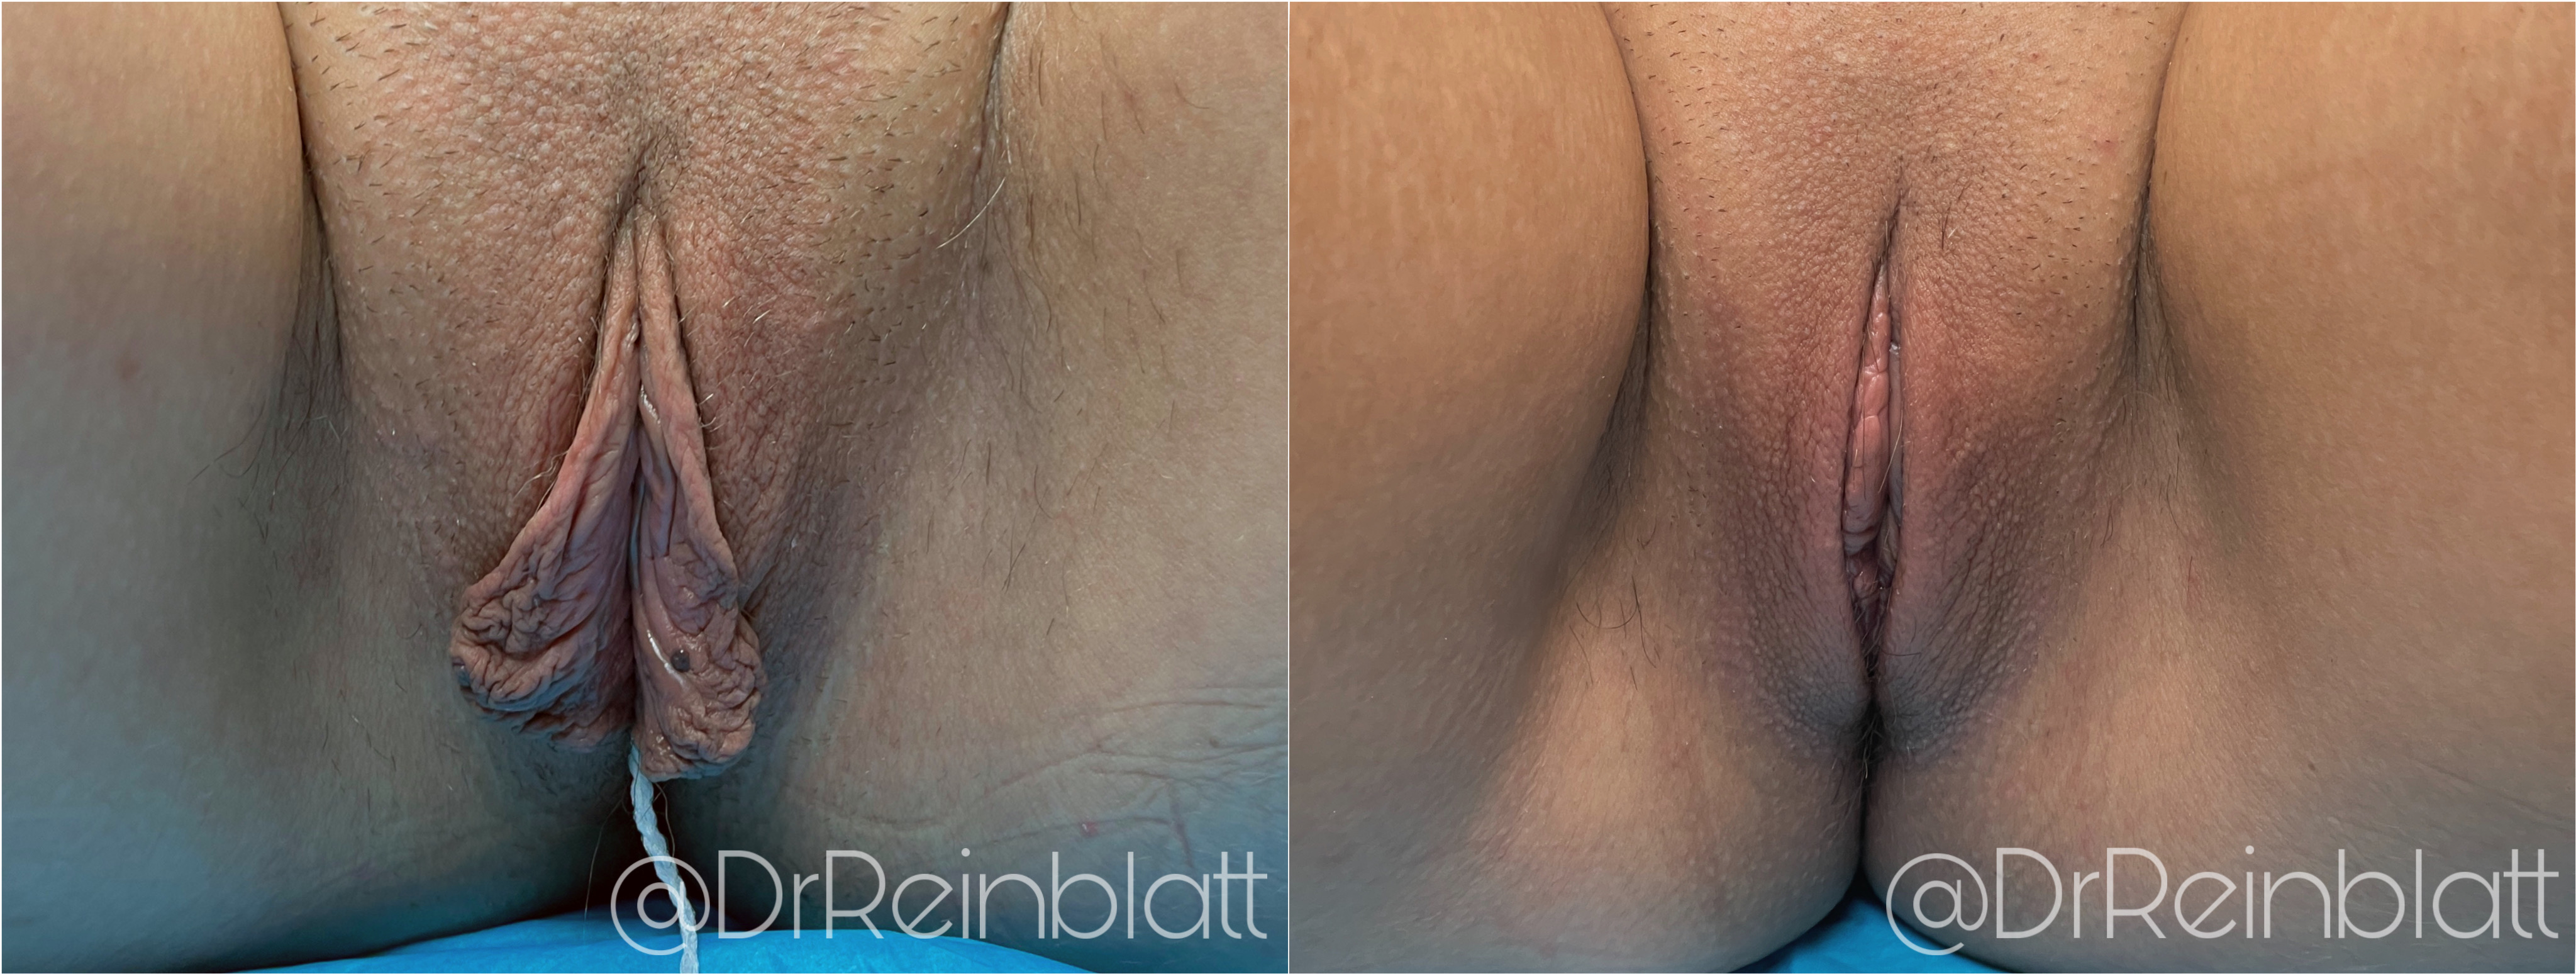 Labiaplasty Before and After | Dr. Maura Reinblatt